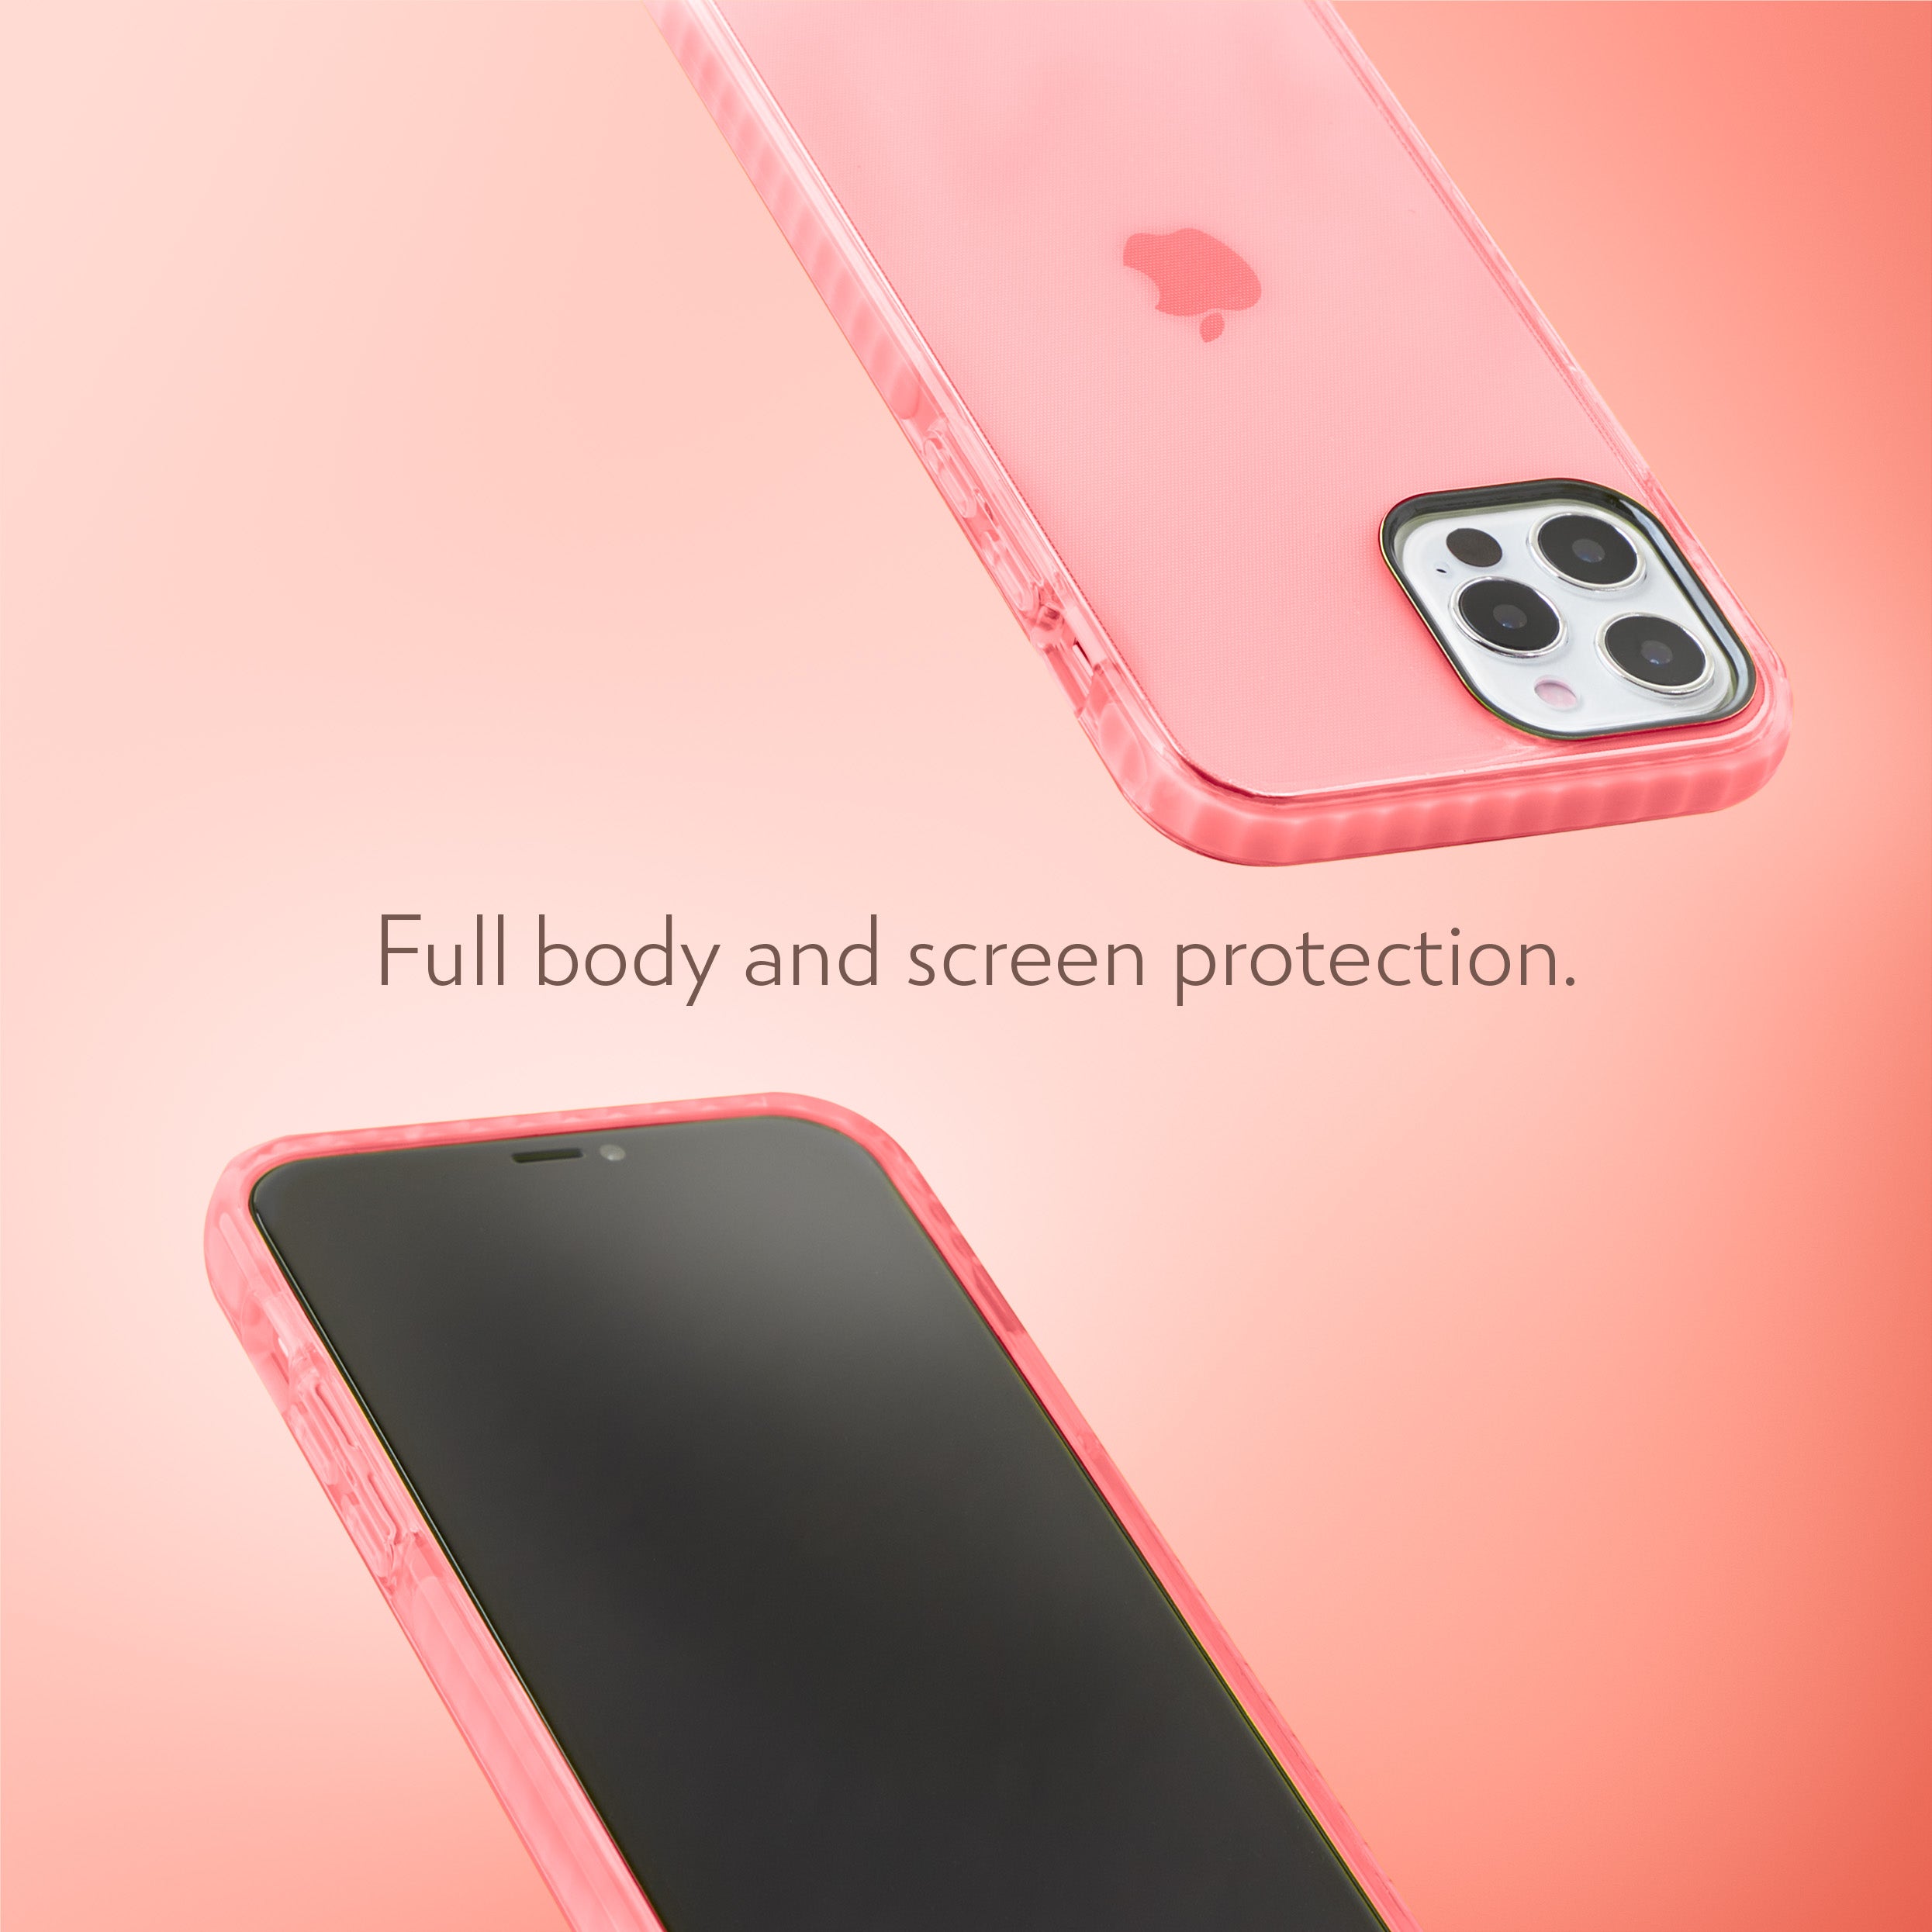 Barrier Case for iPhone 12 Pro Max - Subtle Pink Peach